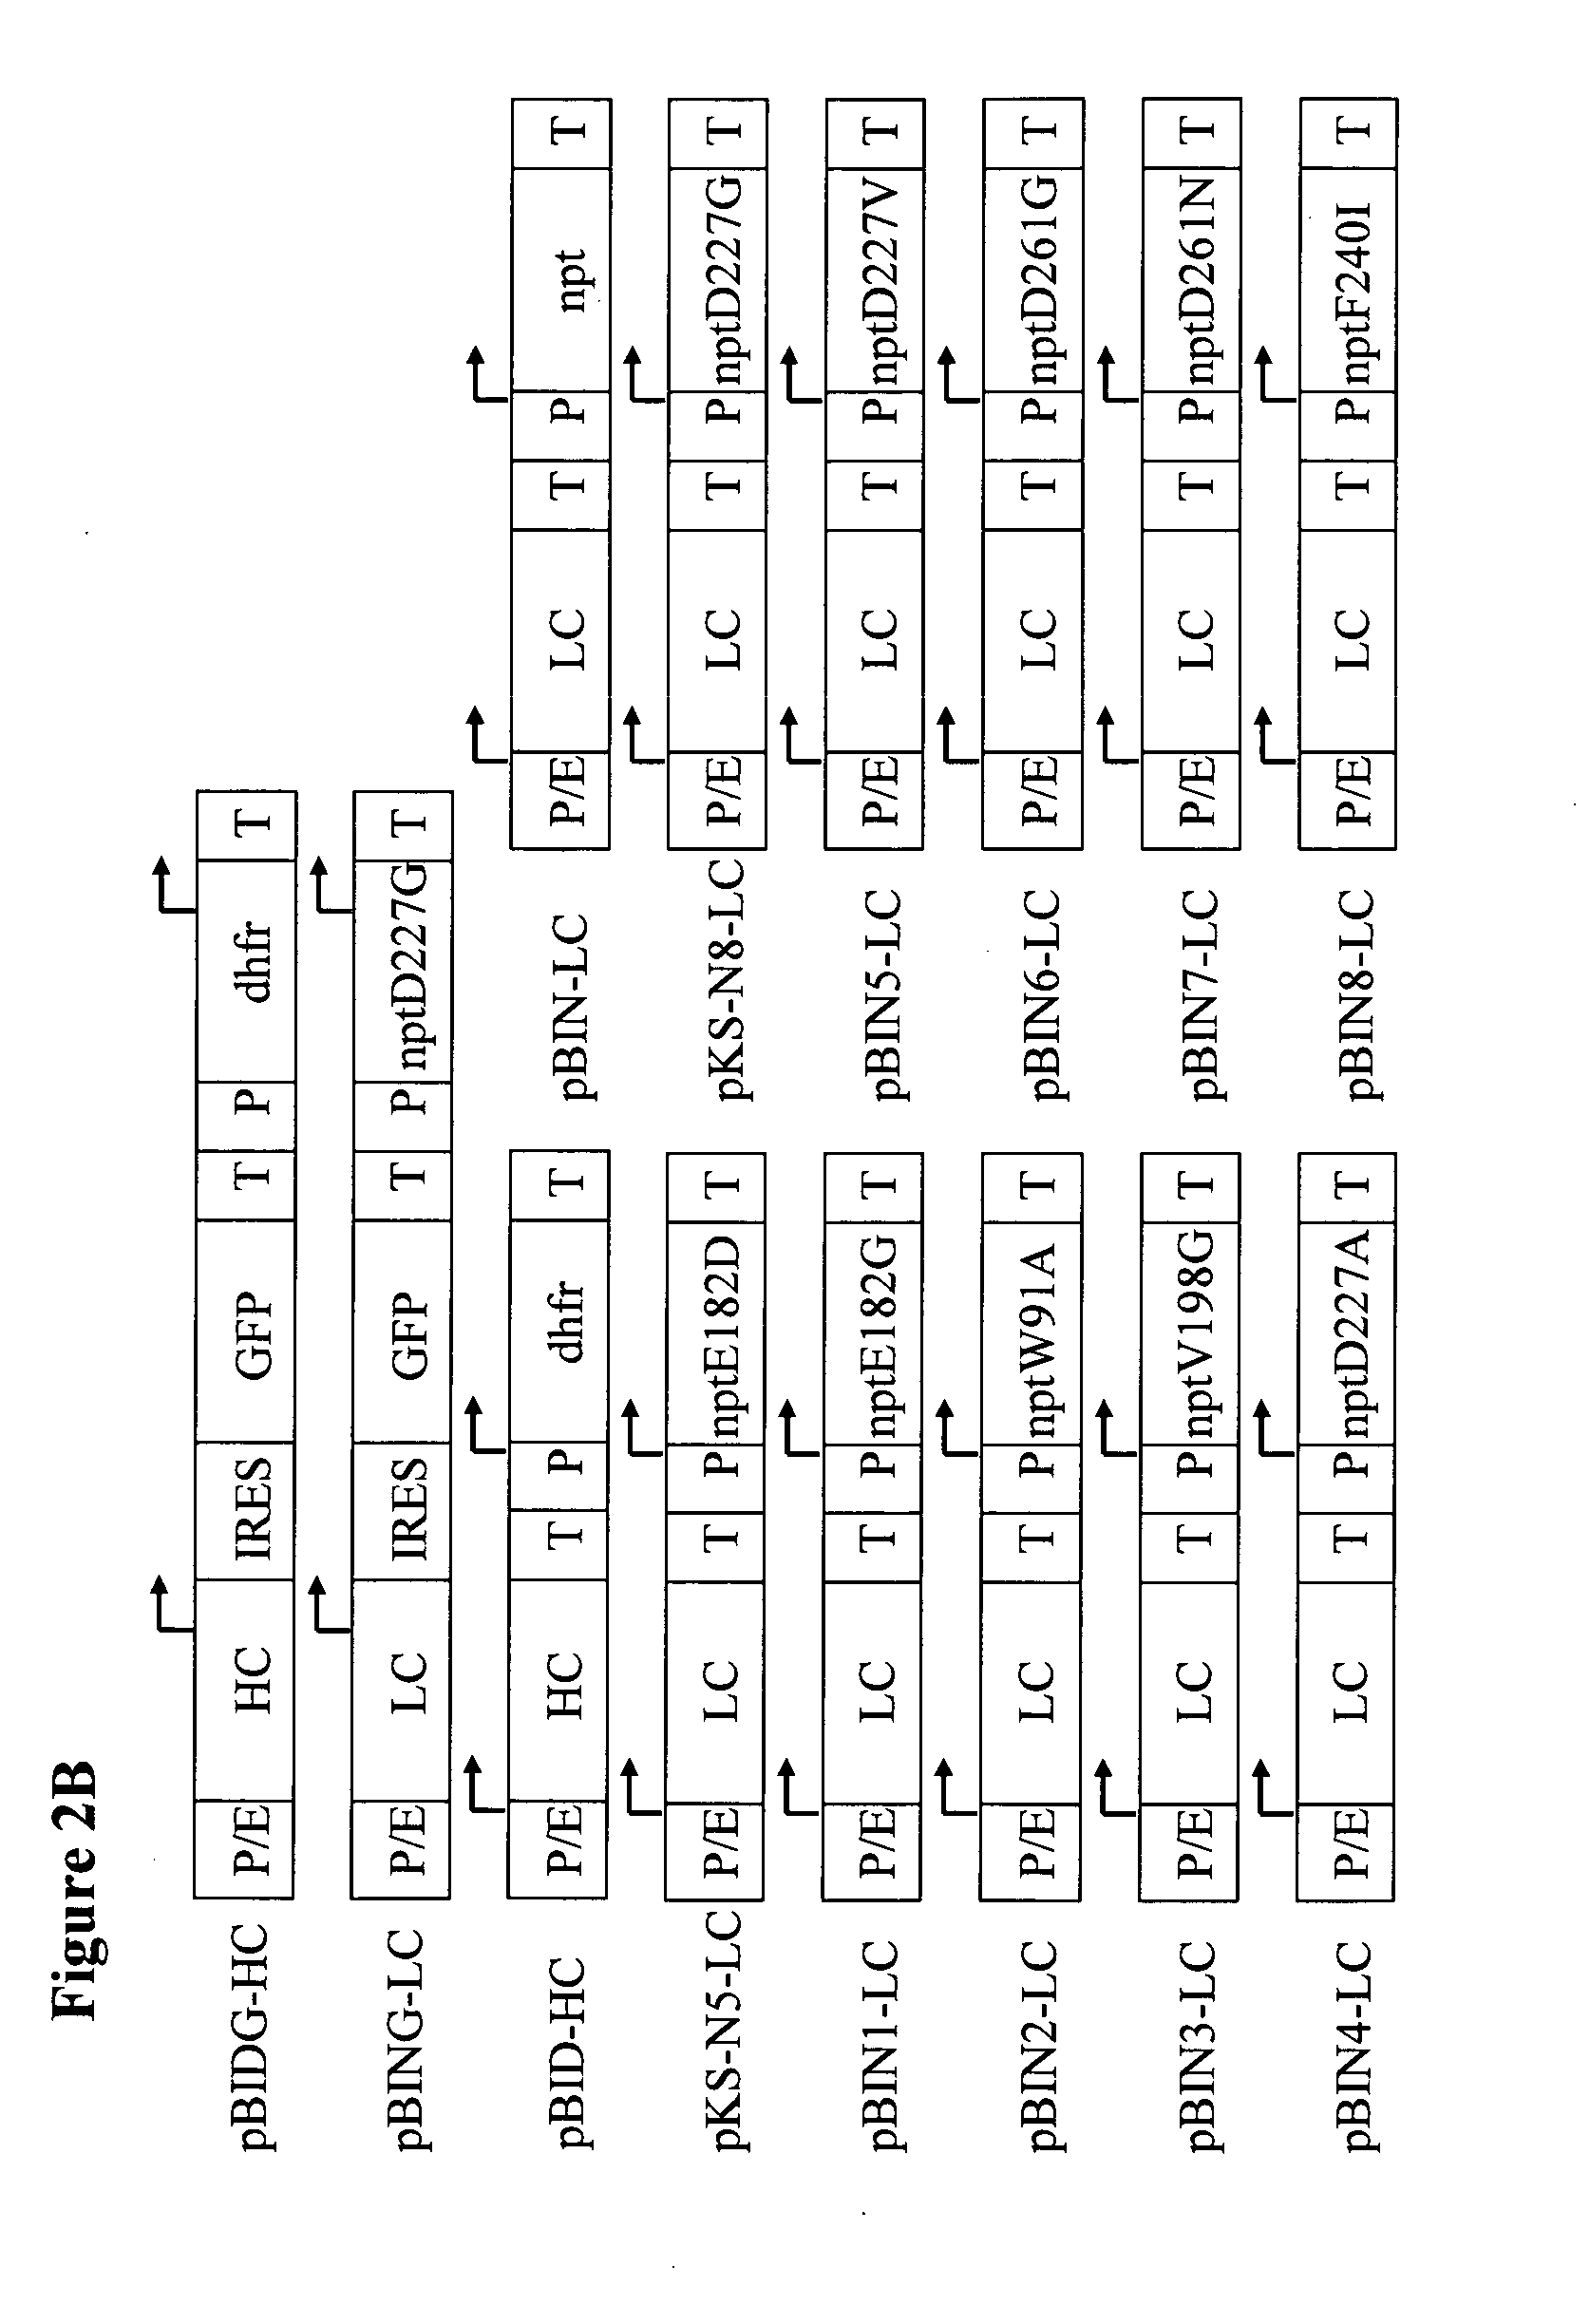 Neomycin-phosphotransferase-genes and methods for the selection for recombinant cells producing high levels of a desired gene product